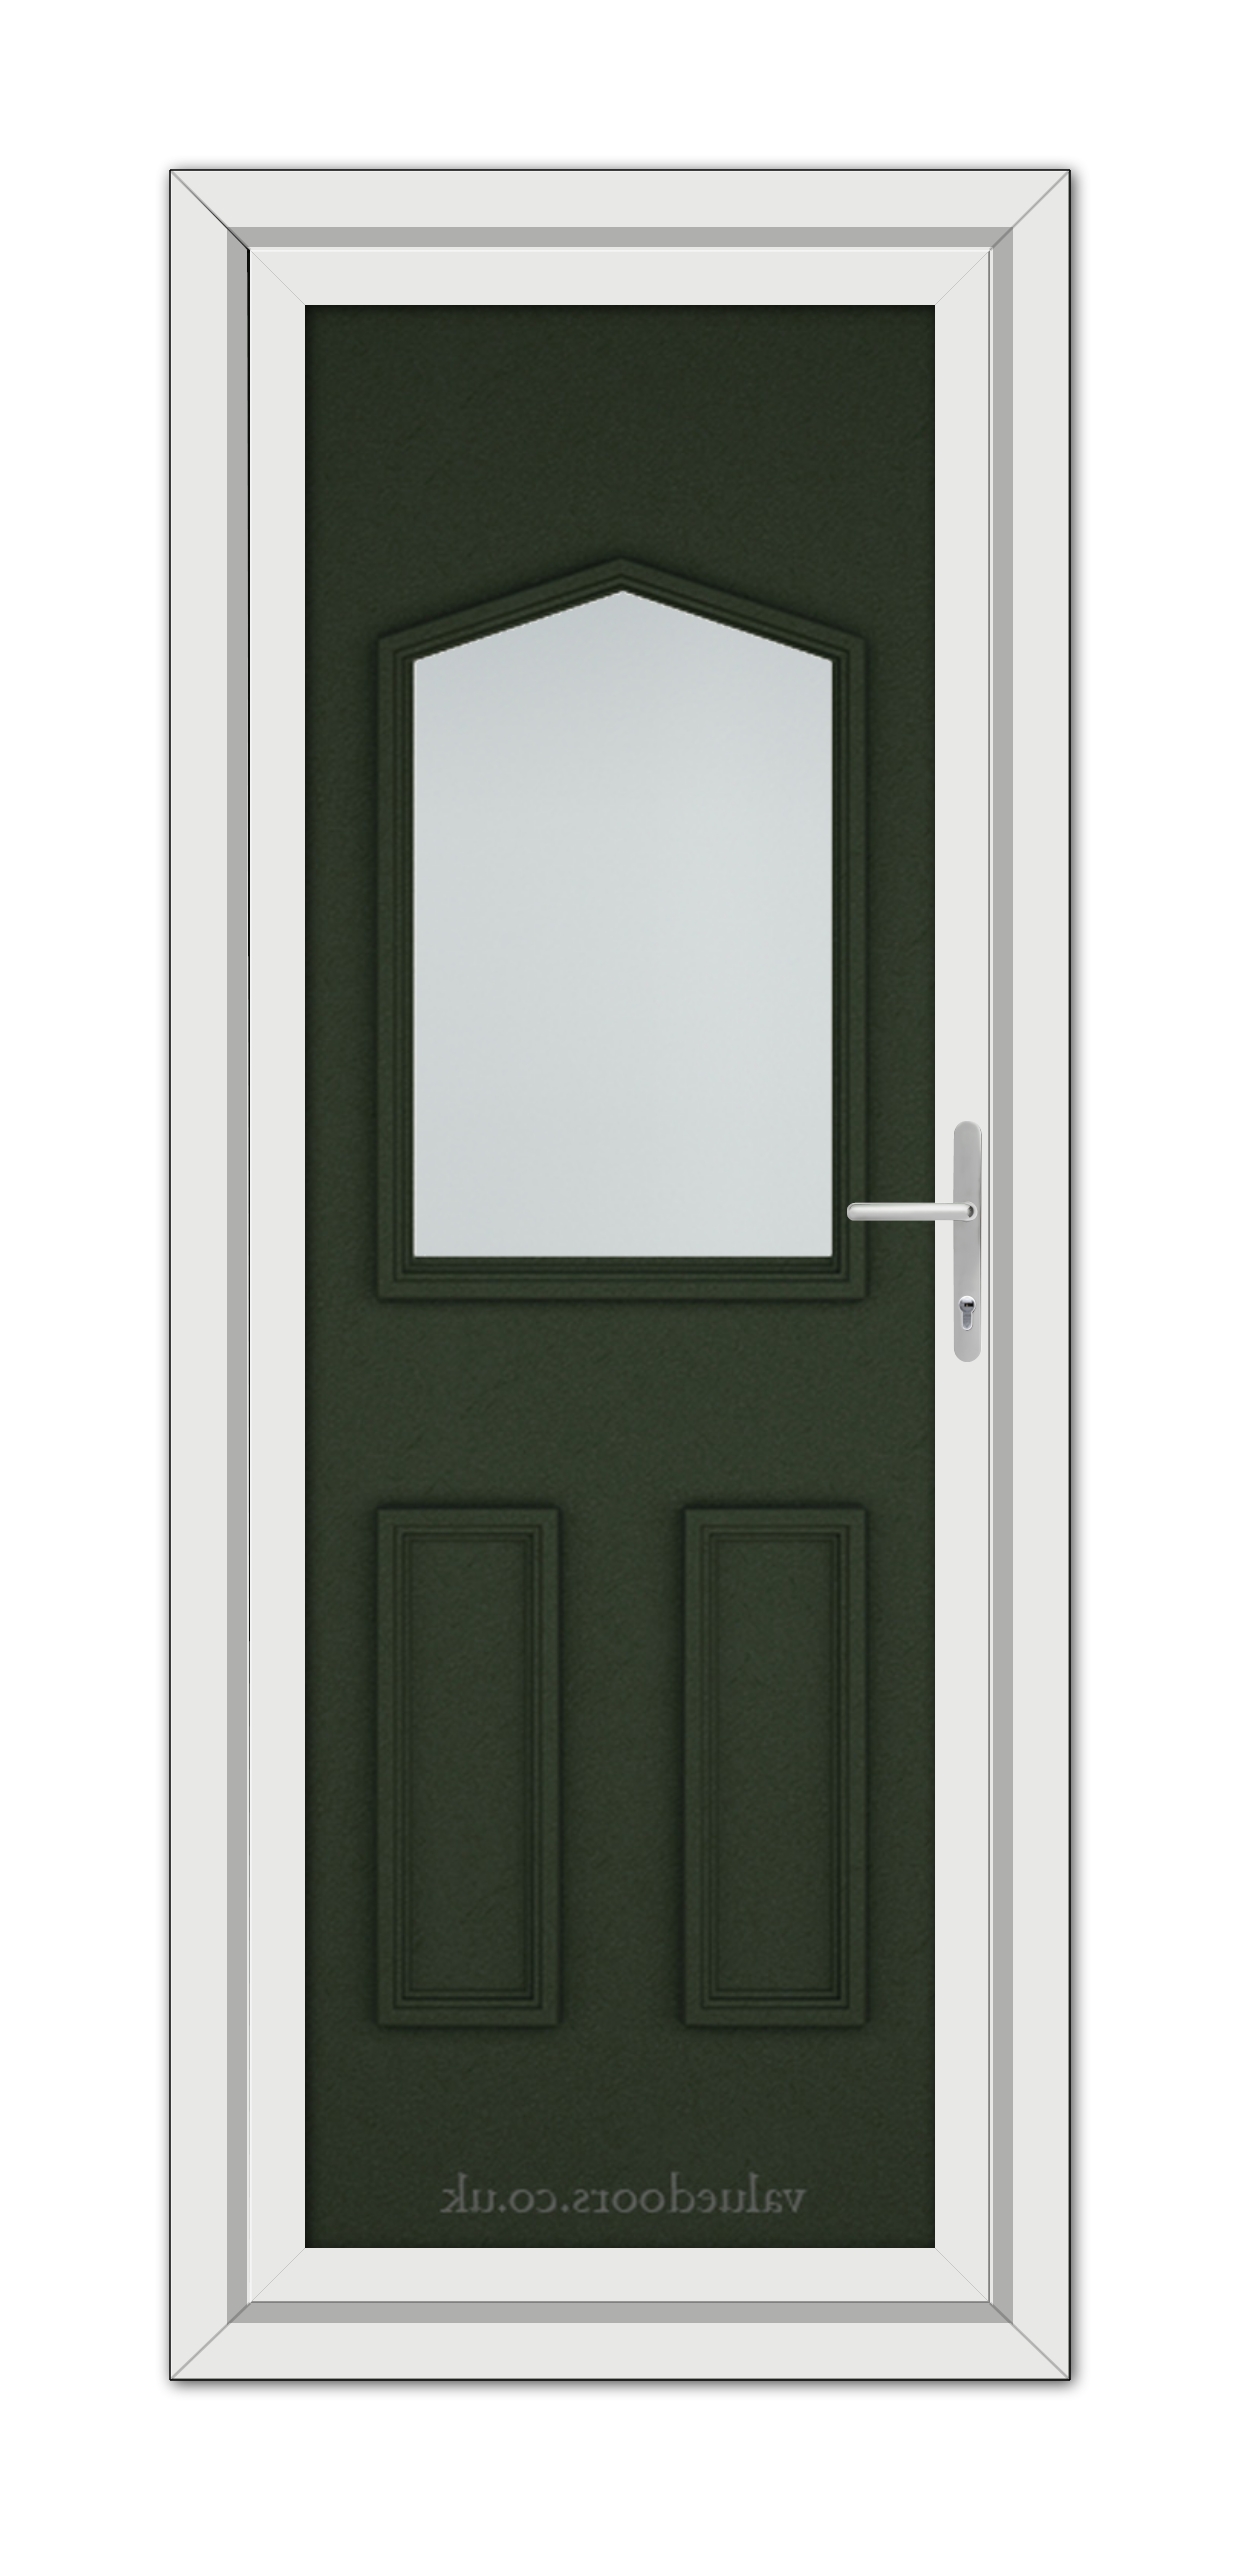 A vertical image of a Green Oxford uPVC Door with an arched window at the top, two recessed panels below, and a silver handle on the right.